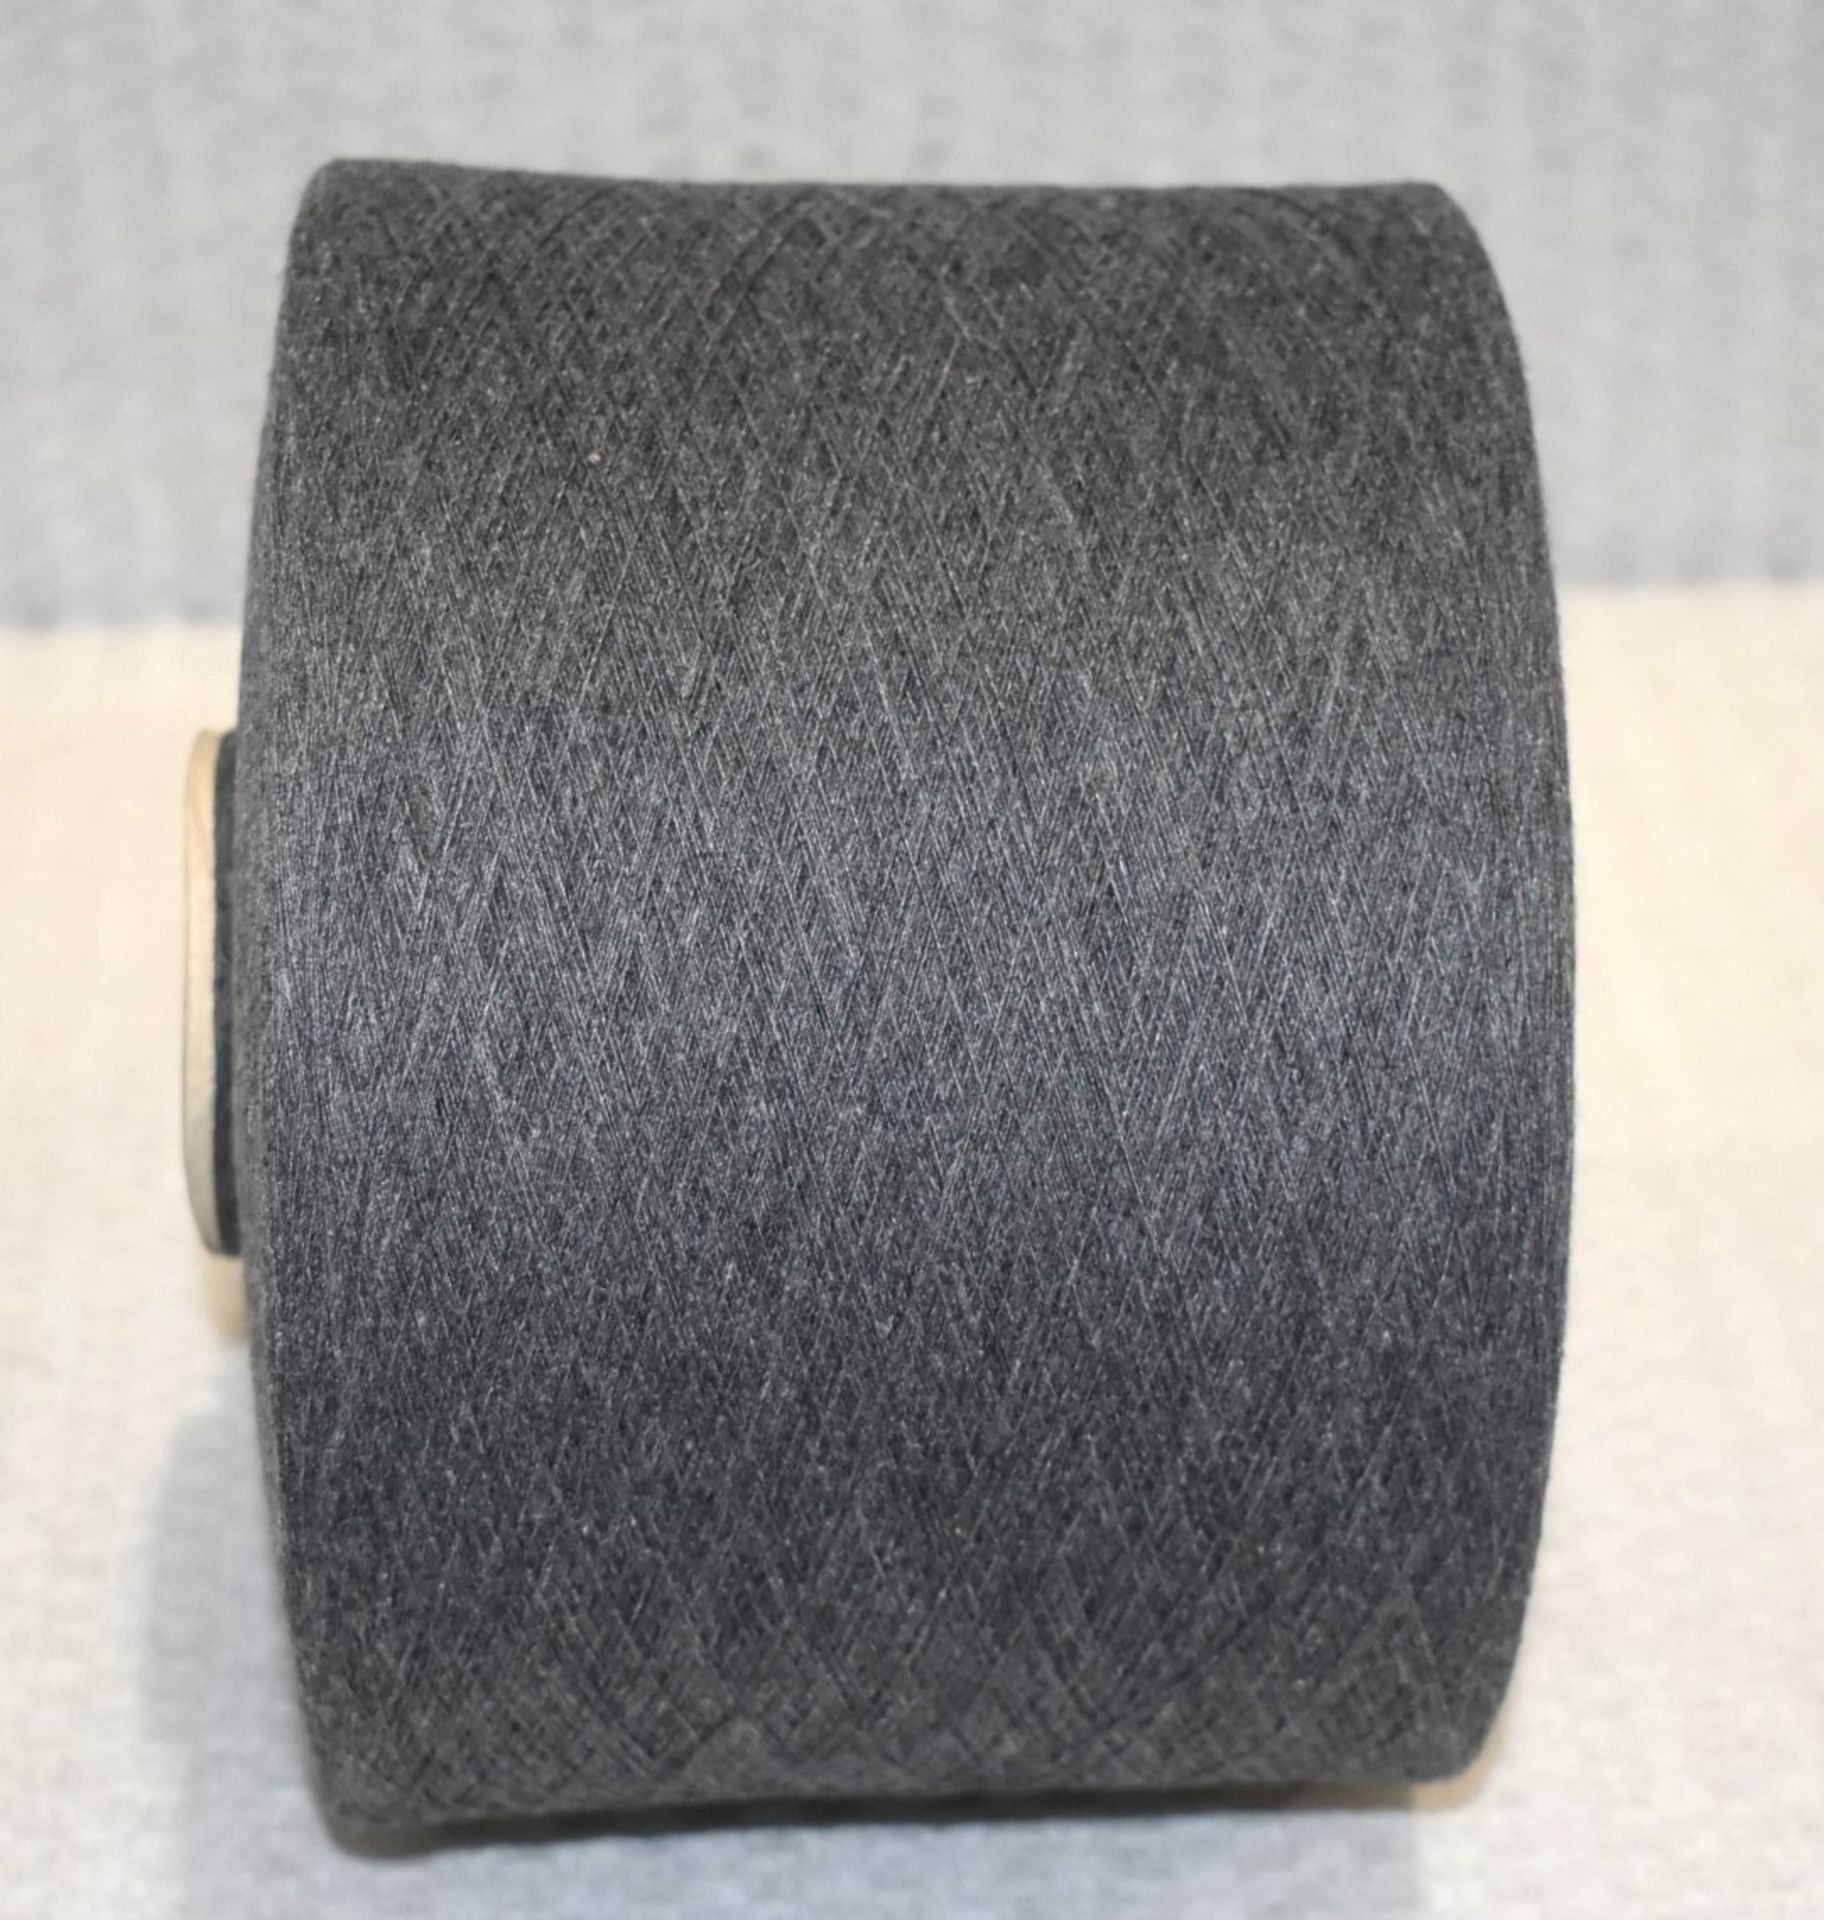 18 x Cones of 1/13 MicroCotton Knitting Yarn - Mid Grey - Approx Weight: 2,500g - New Stock ABL Yarn - Image 10 of 11